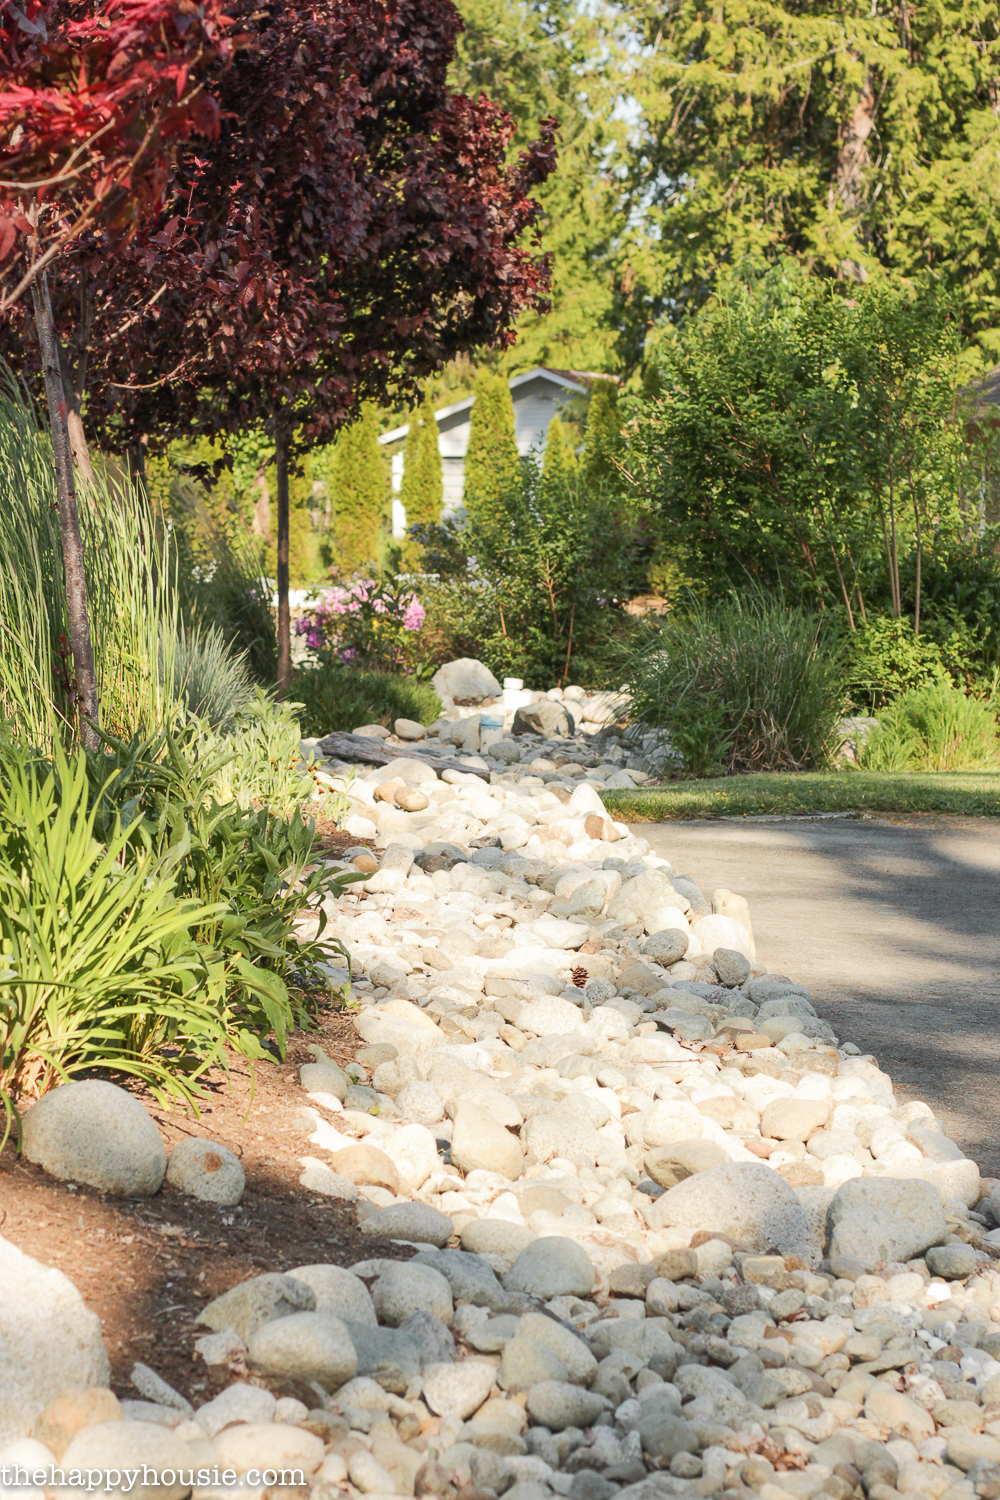 landscaping with river rock & dry river rock garden ideas